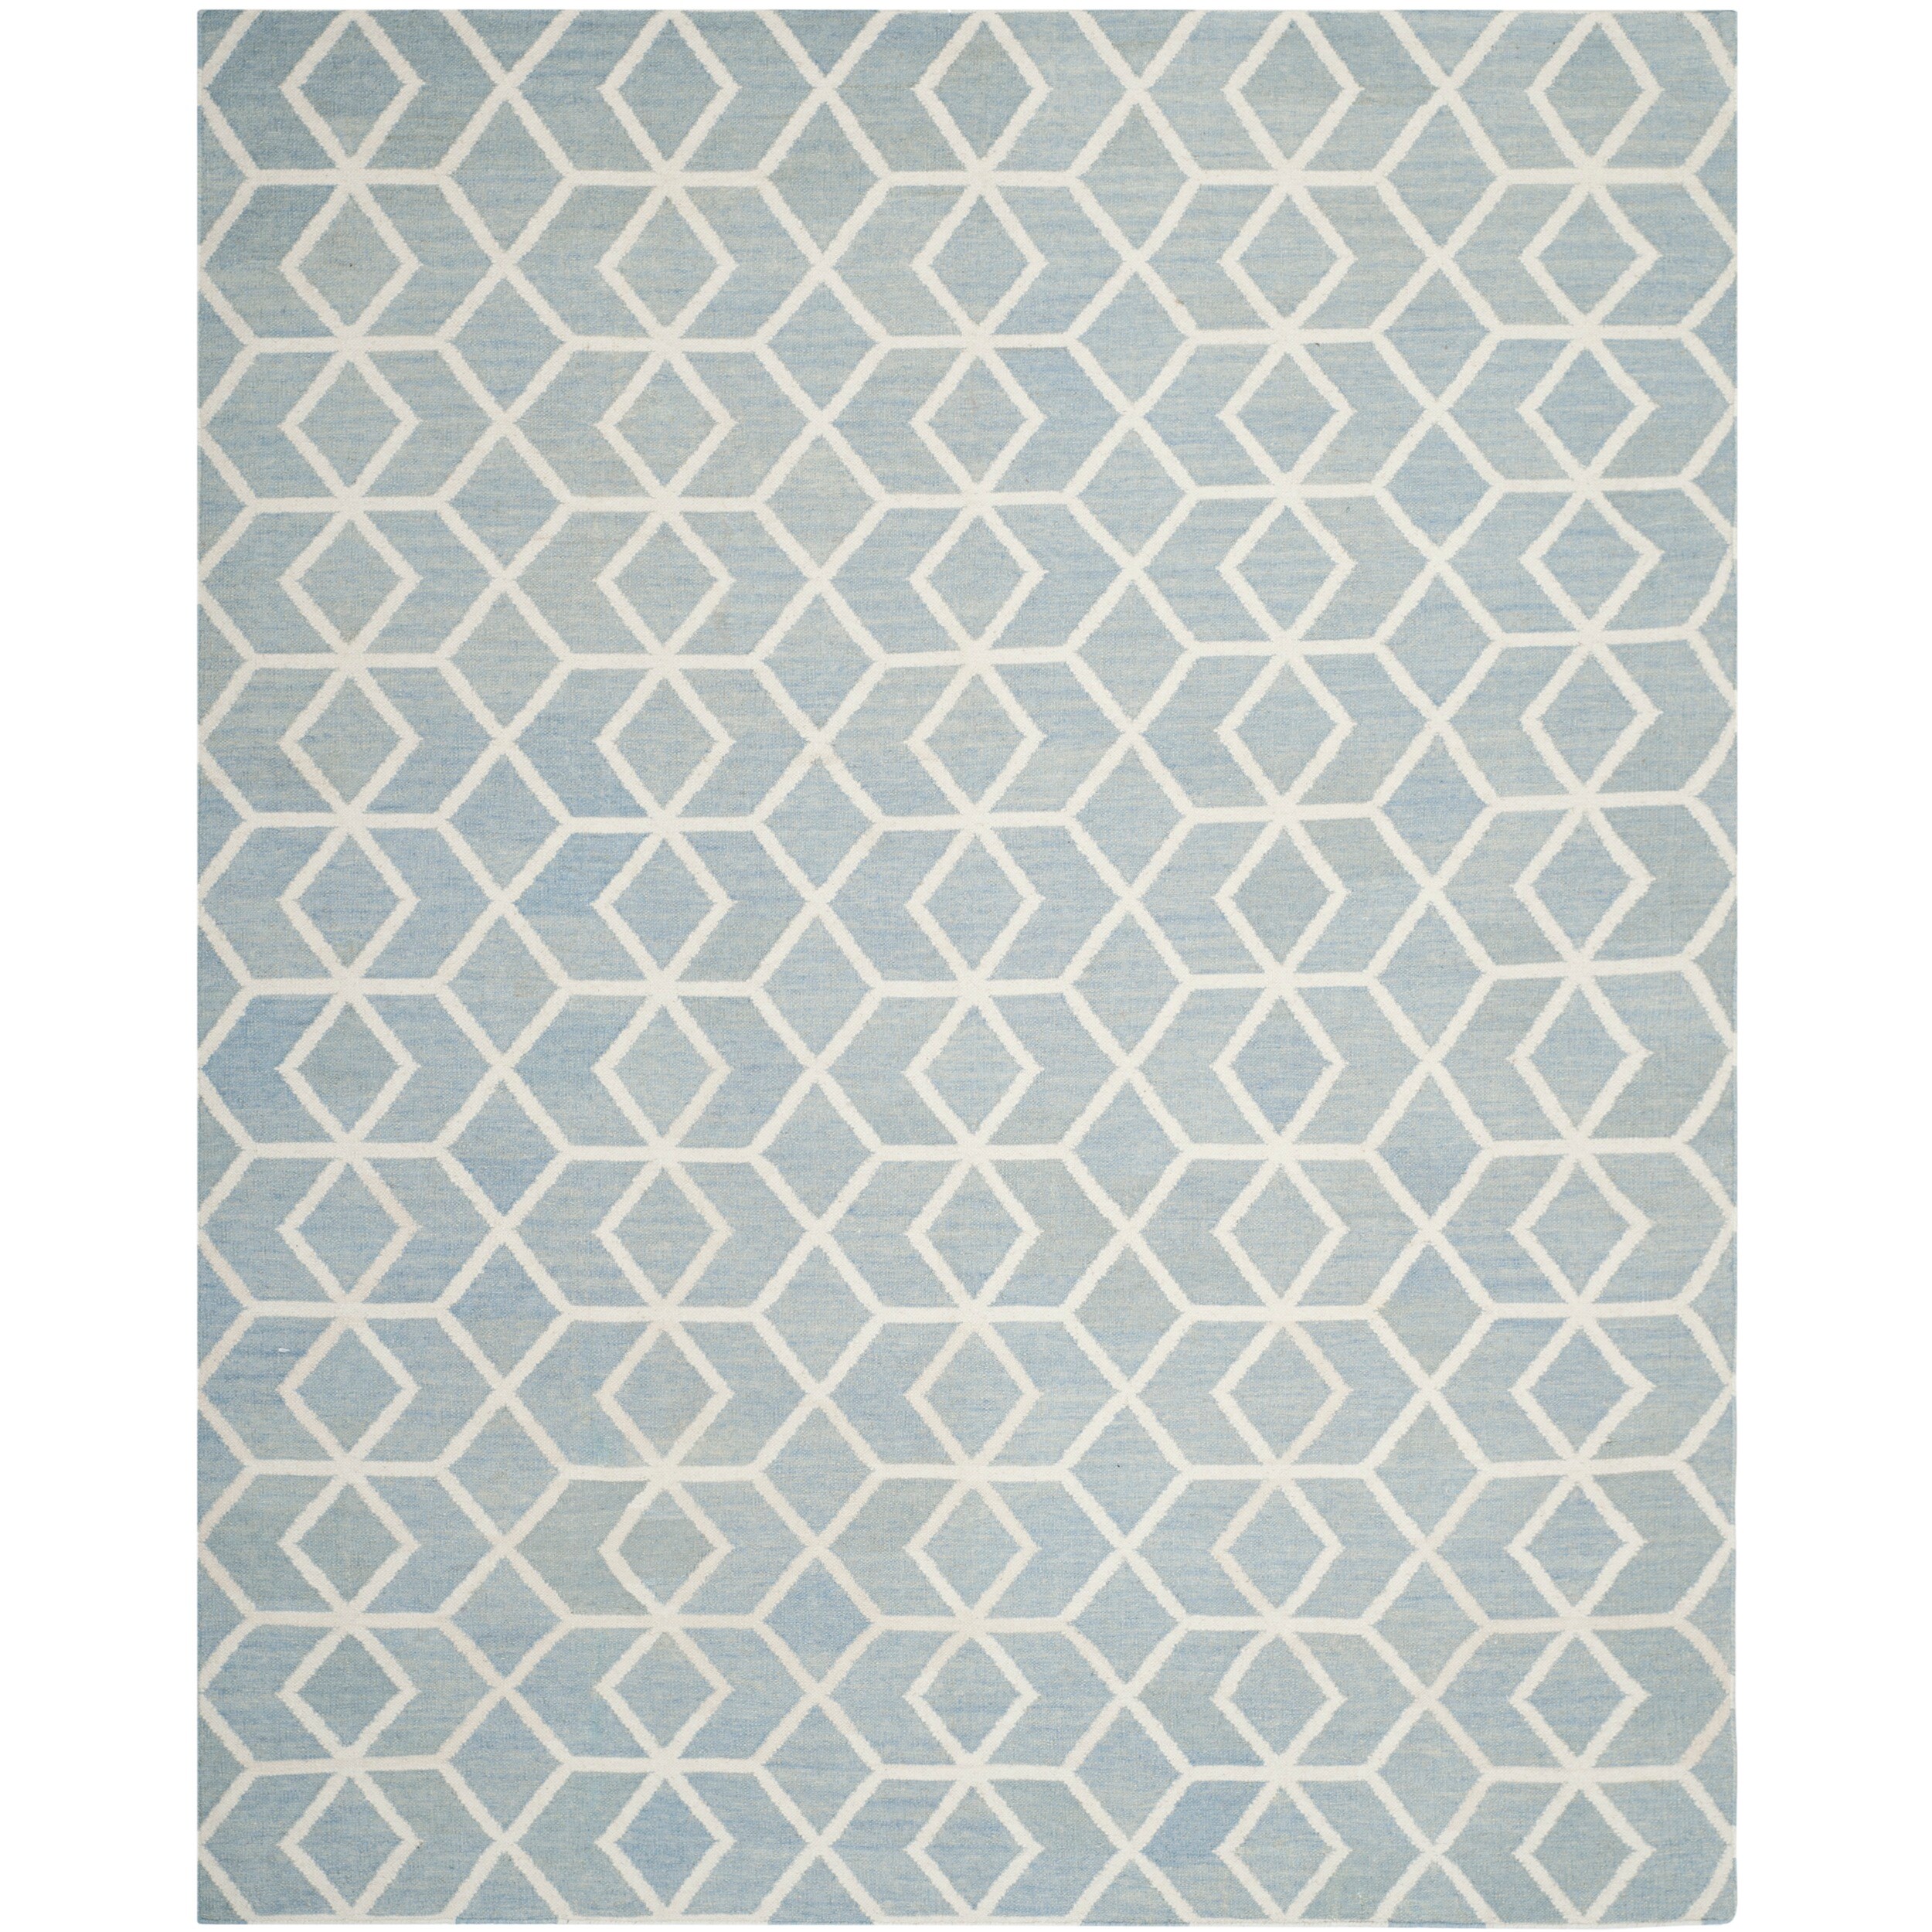 Contemporary Safavieh Handwoven Moroccan Dhurrie Blue/ Ivory Wool Rug (9 X 12)